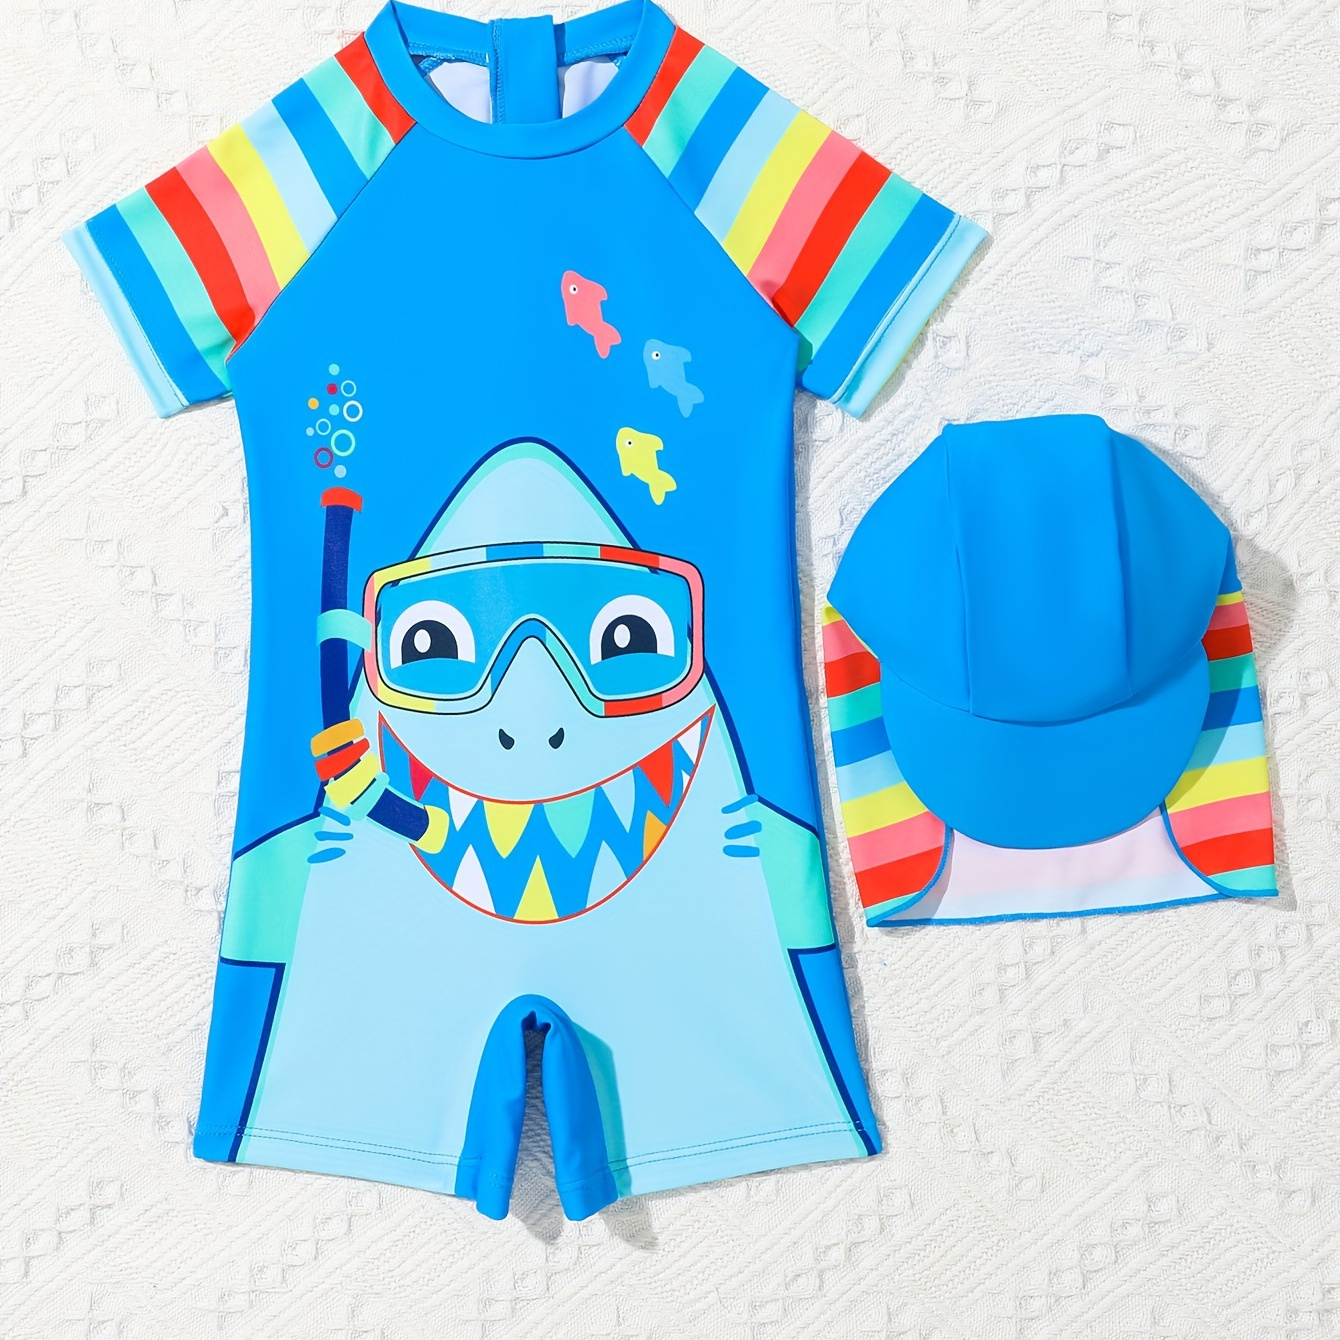 

Baby Boys' One-piece Swimsuit With Cap, Cute Cartoon Shark Print, Quick Dry, Sun Protection, Blue, Multi-color Stripes, Summer Beachwear For Toddlers